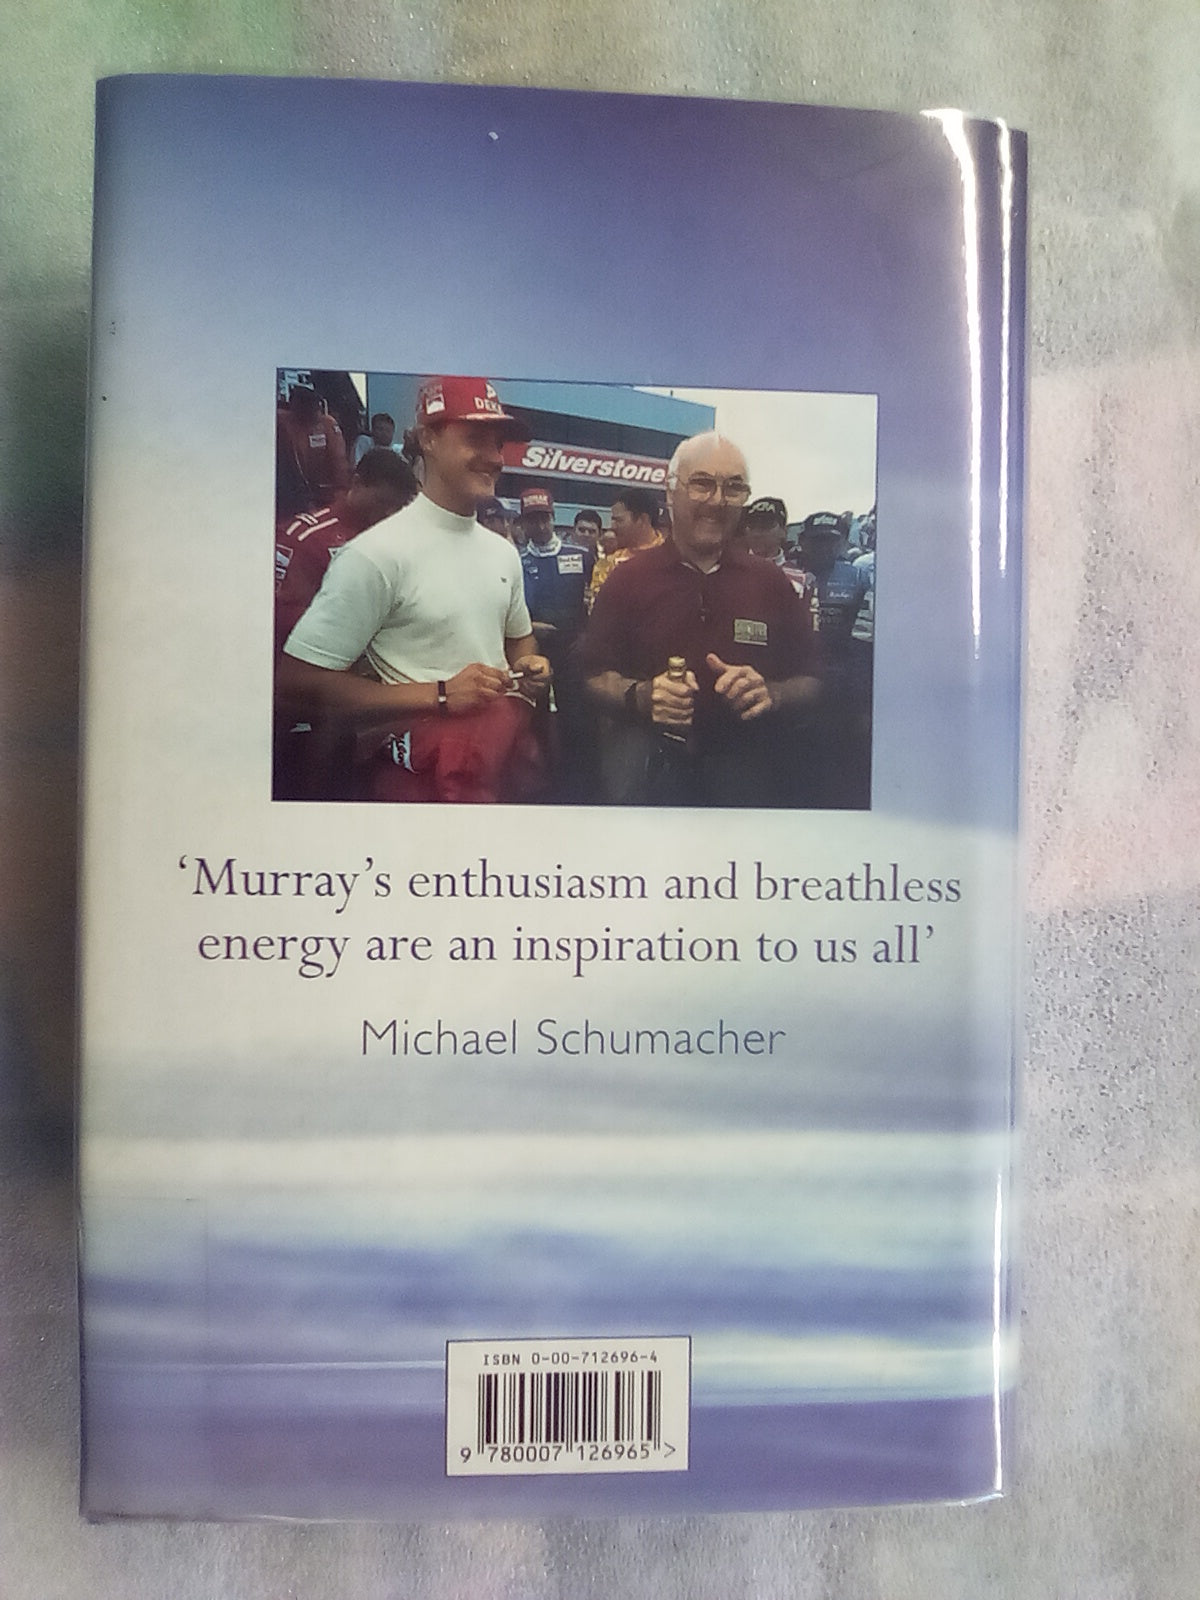 Unless I'm Very Much Mistaken - Murray Walker Autobiography (Signed Copy)